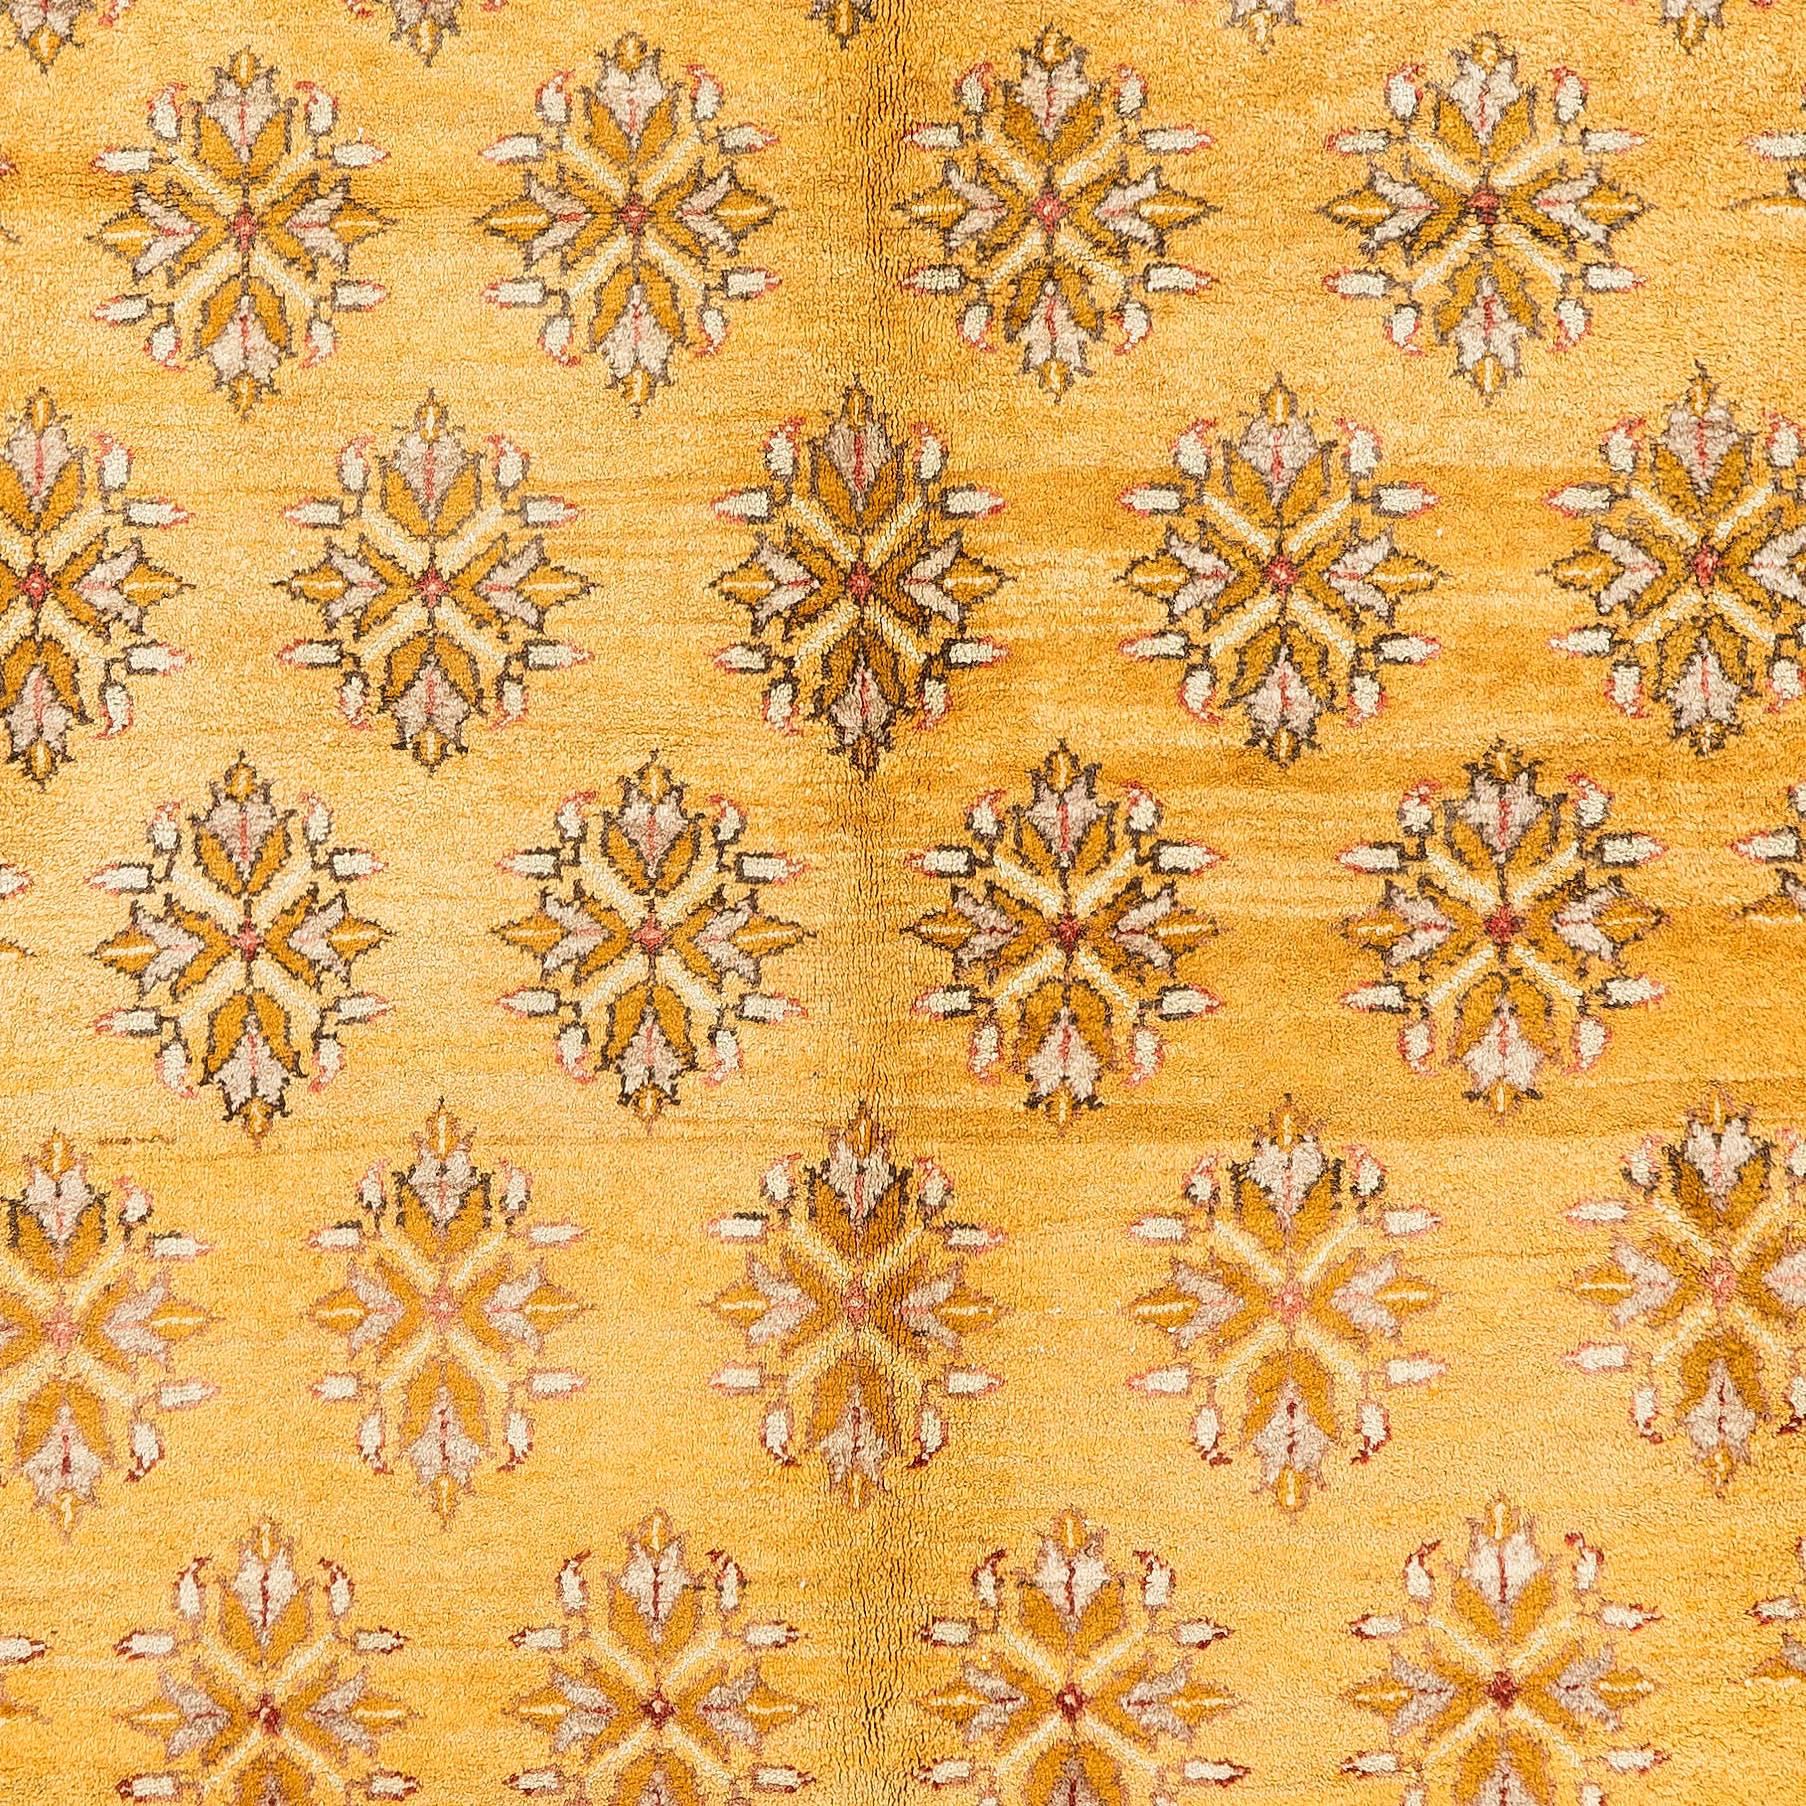 5x10 Ft One-of-a-Kind 1950s Handmade Turkish Wool Rug in Butterscotch Yellow In Good Condition For Sale In Philadelphia, PA